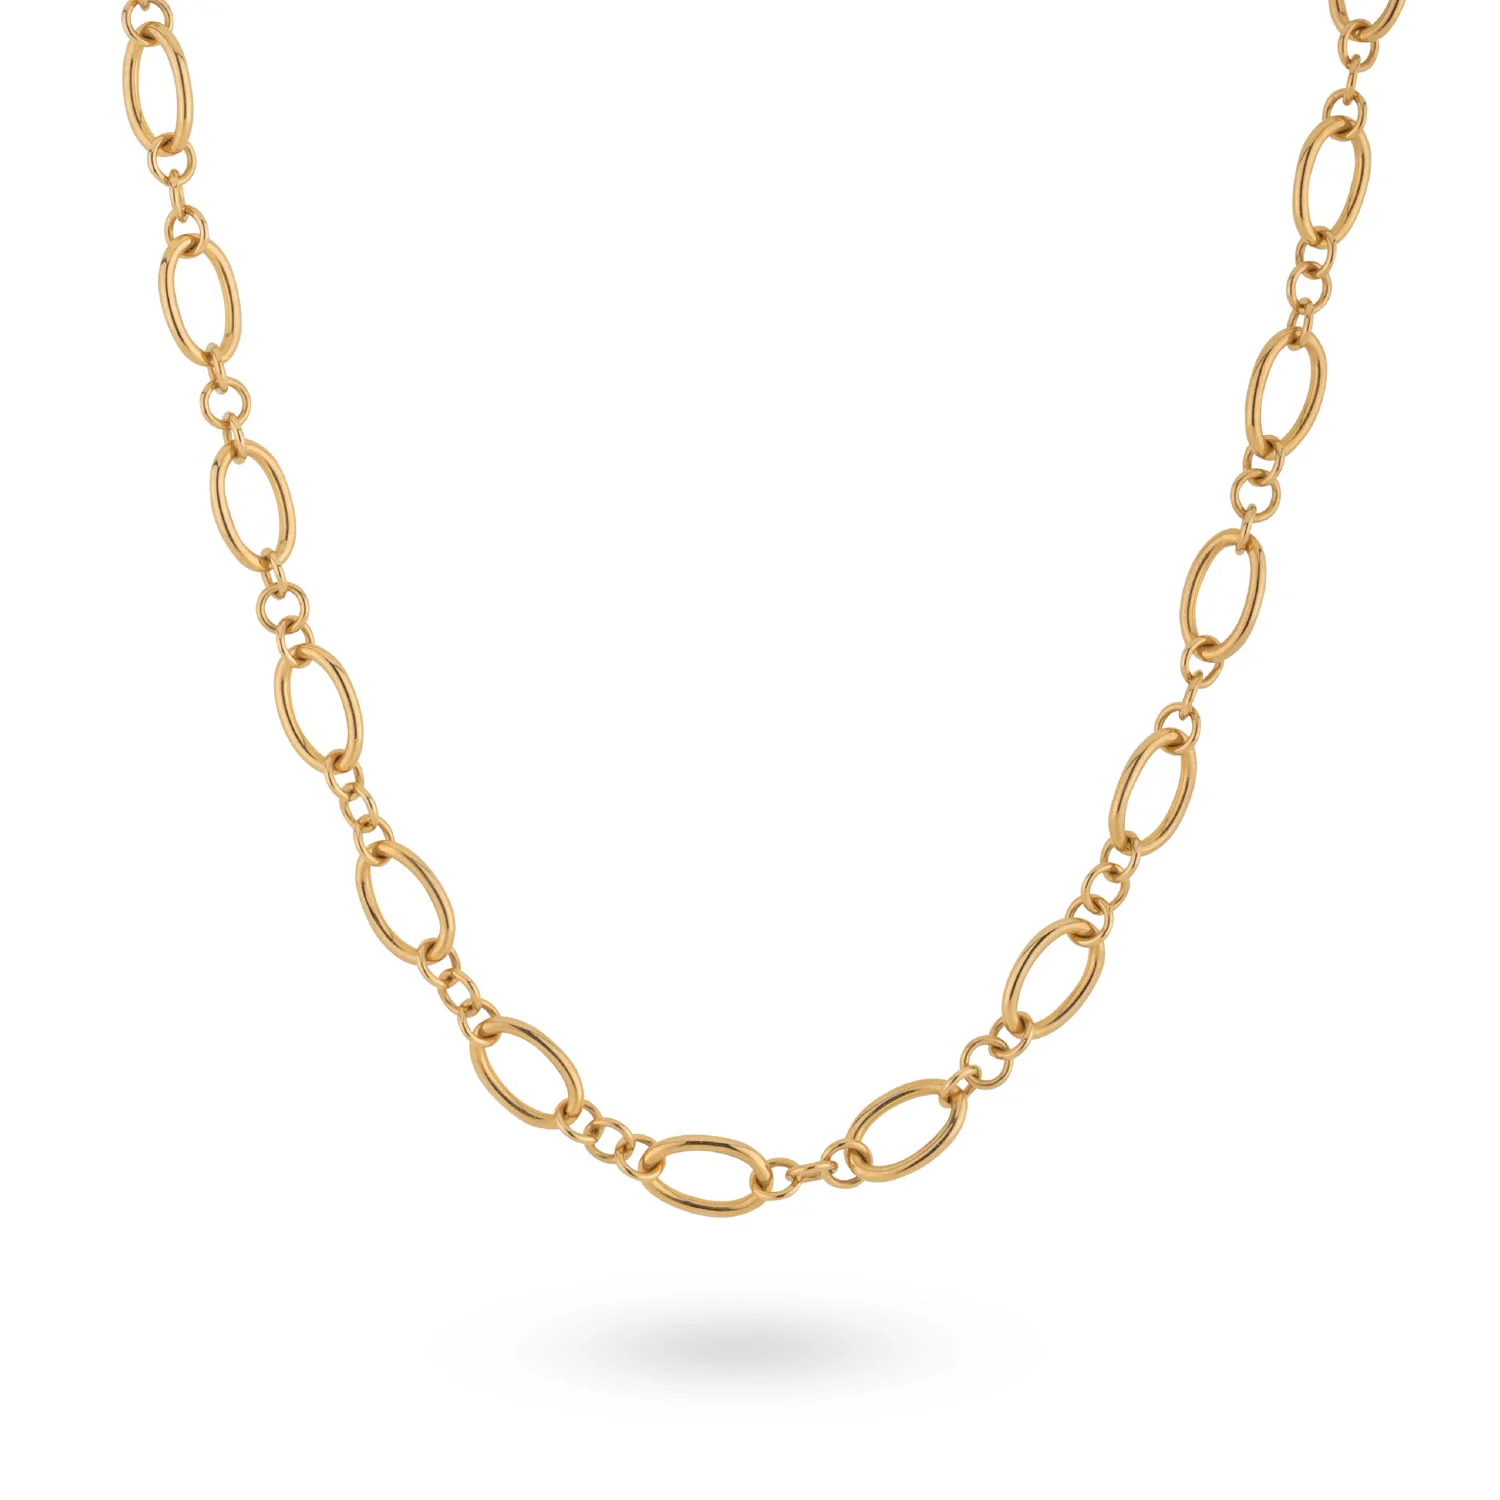 24Kae Gold Oval & Round Link Necklace